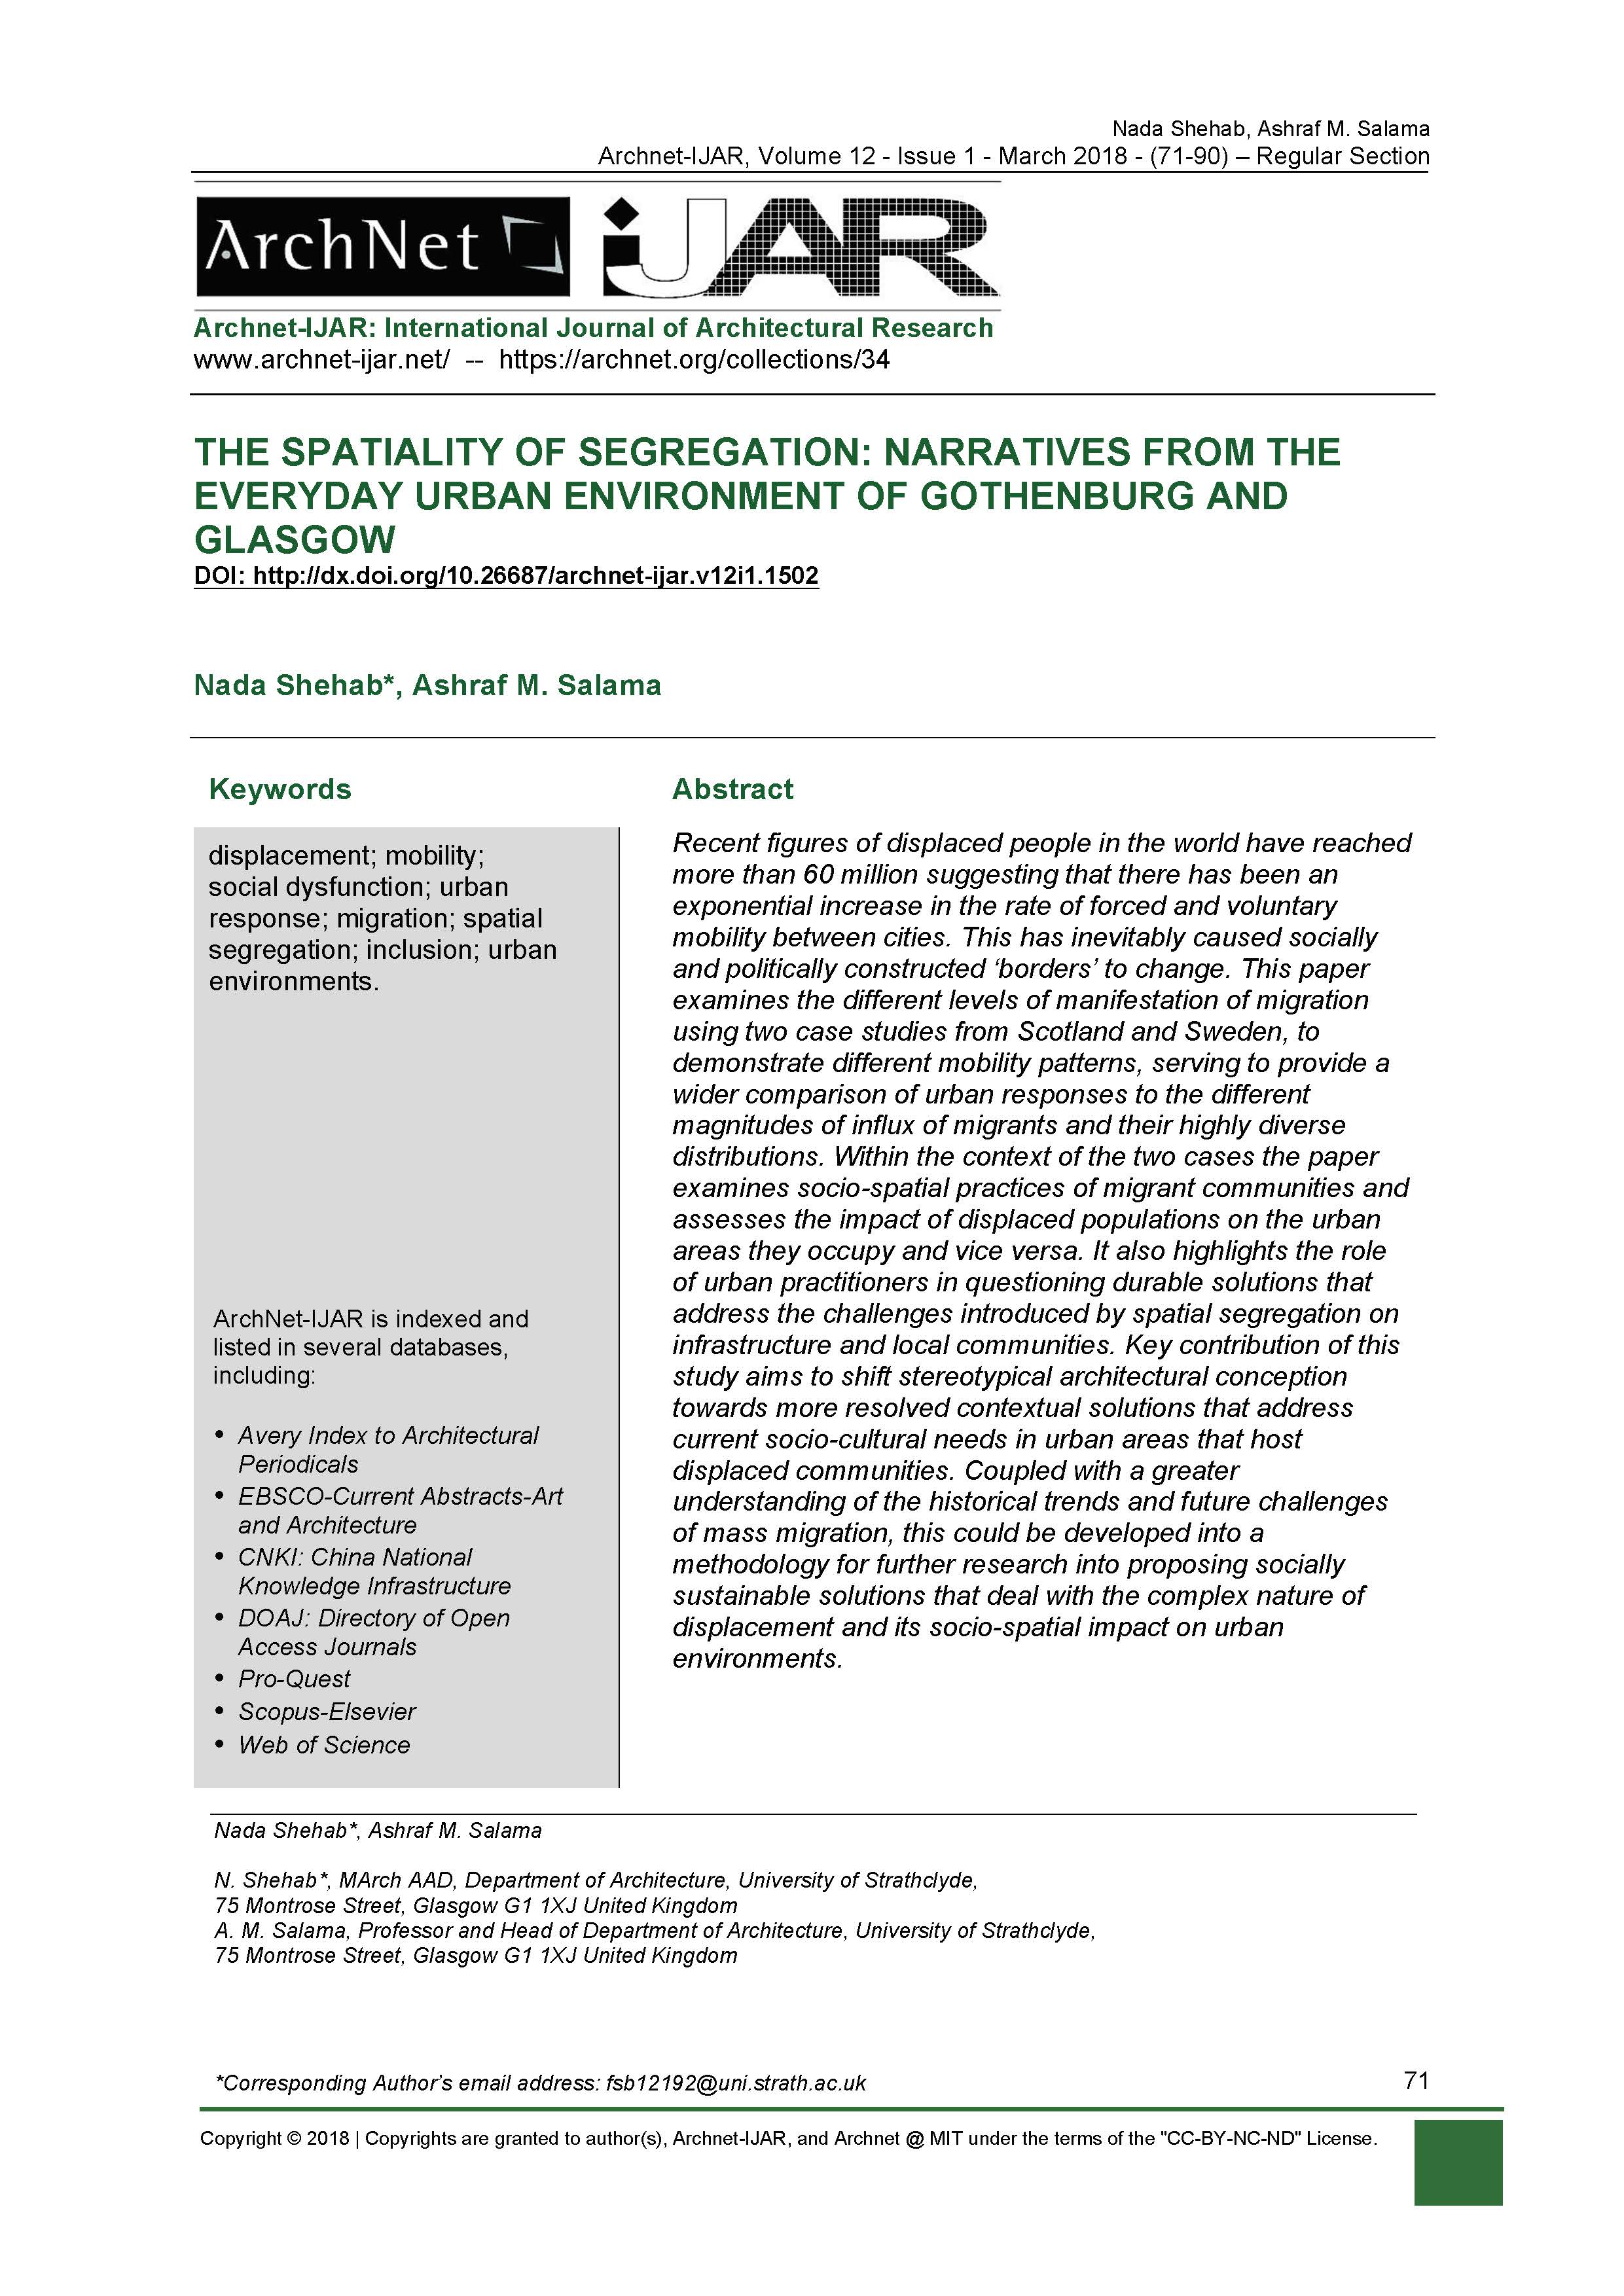 The Spatiality of Segregation: Narratives from the Everyday Urban Environment of Gothenburg and Glasgow